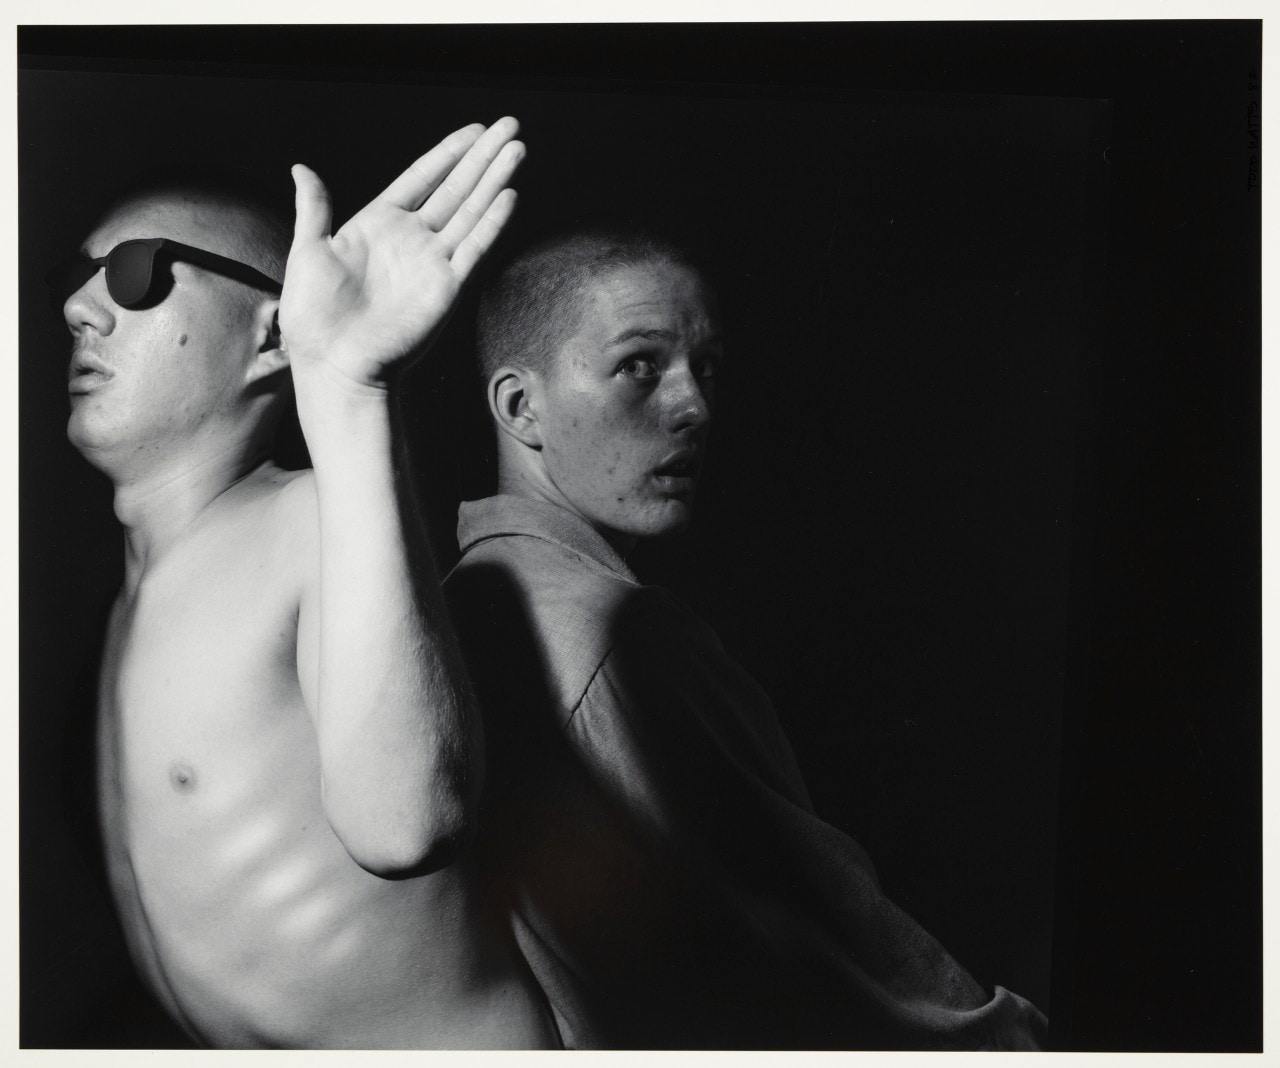 Black and white photo of two men, one on the left is topless, wears sunglasses and has a hand on his shoulderands in the air, the one on the right is obscured and 